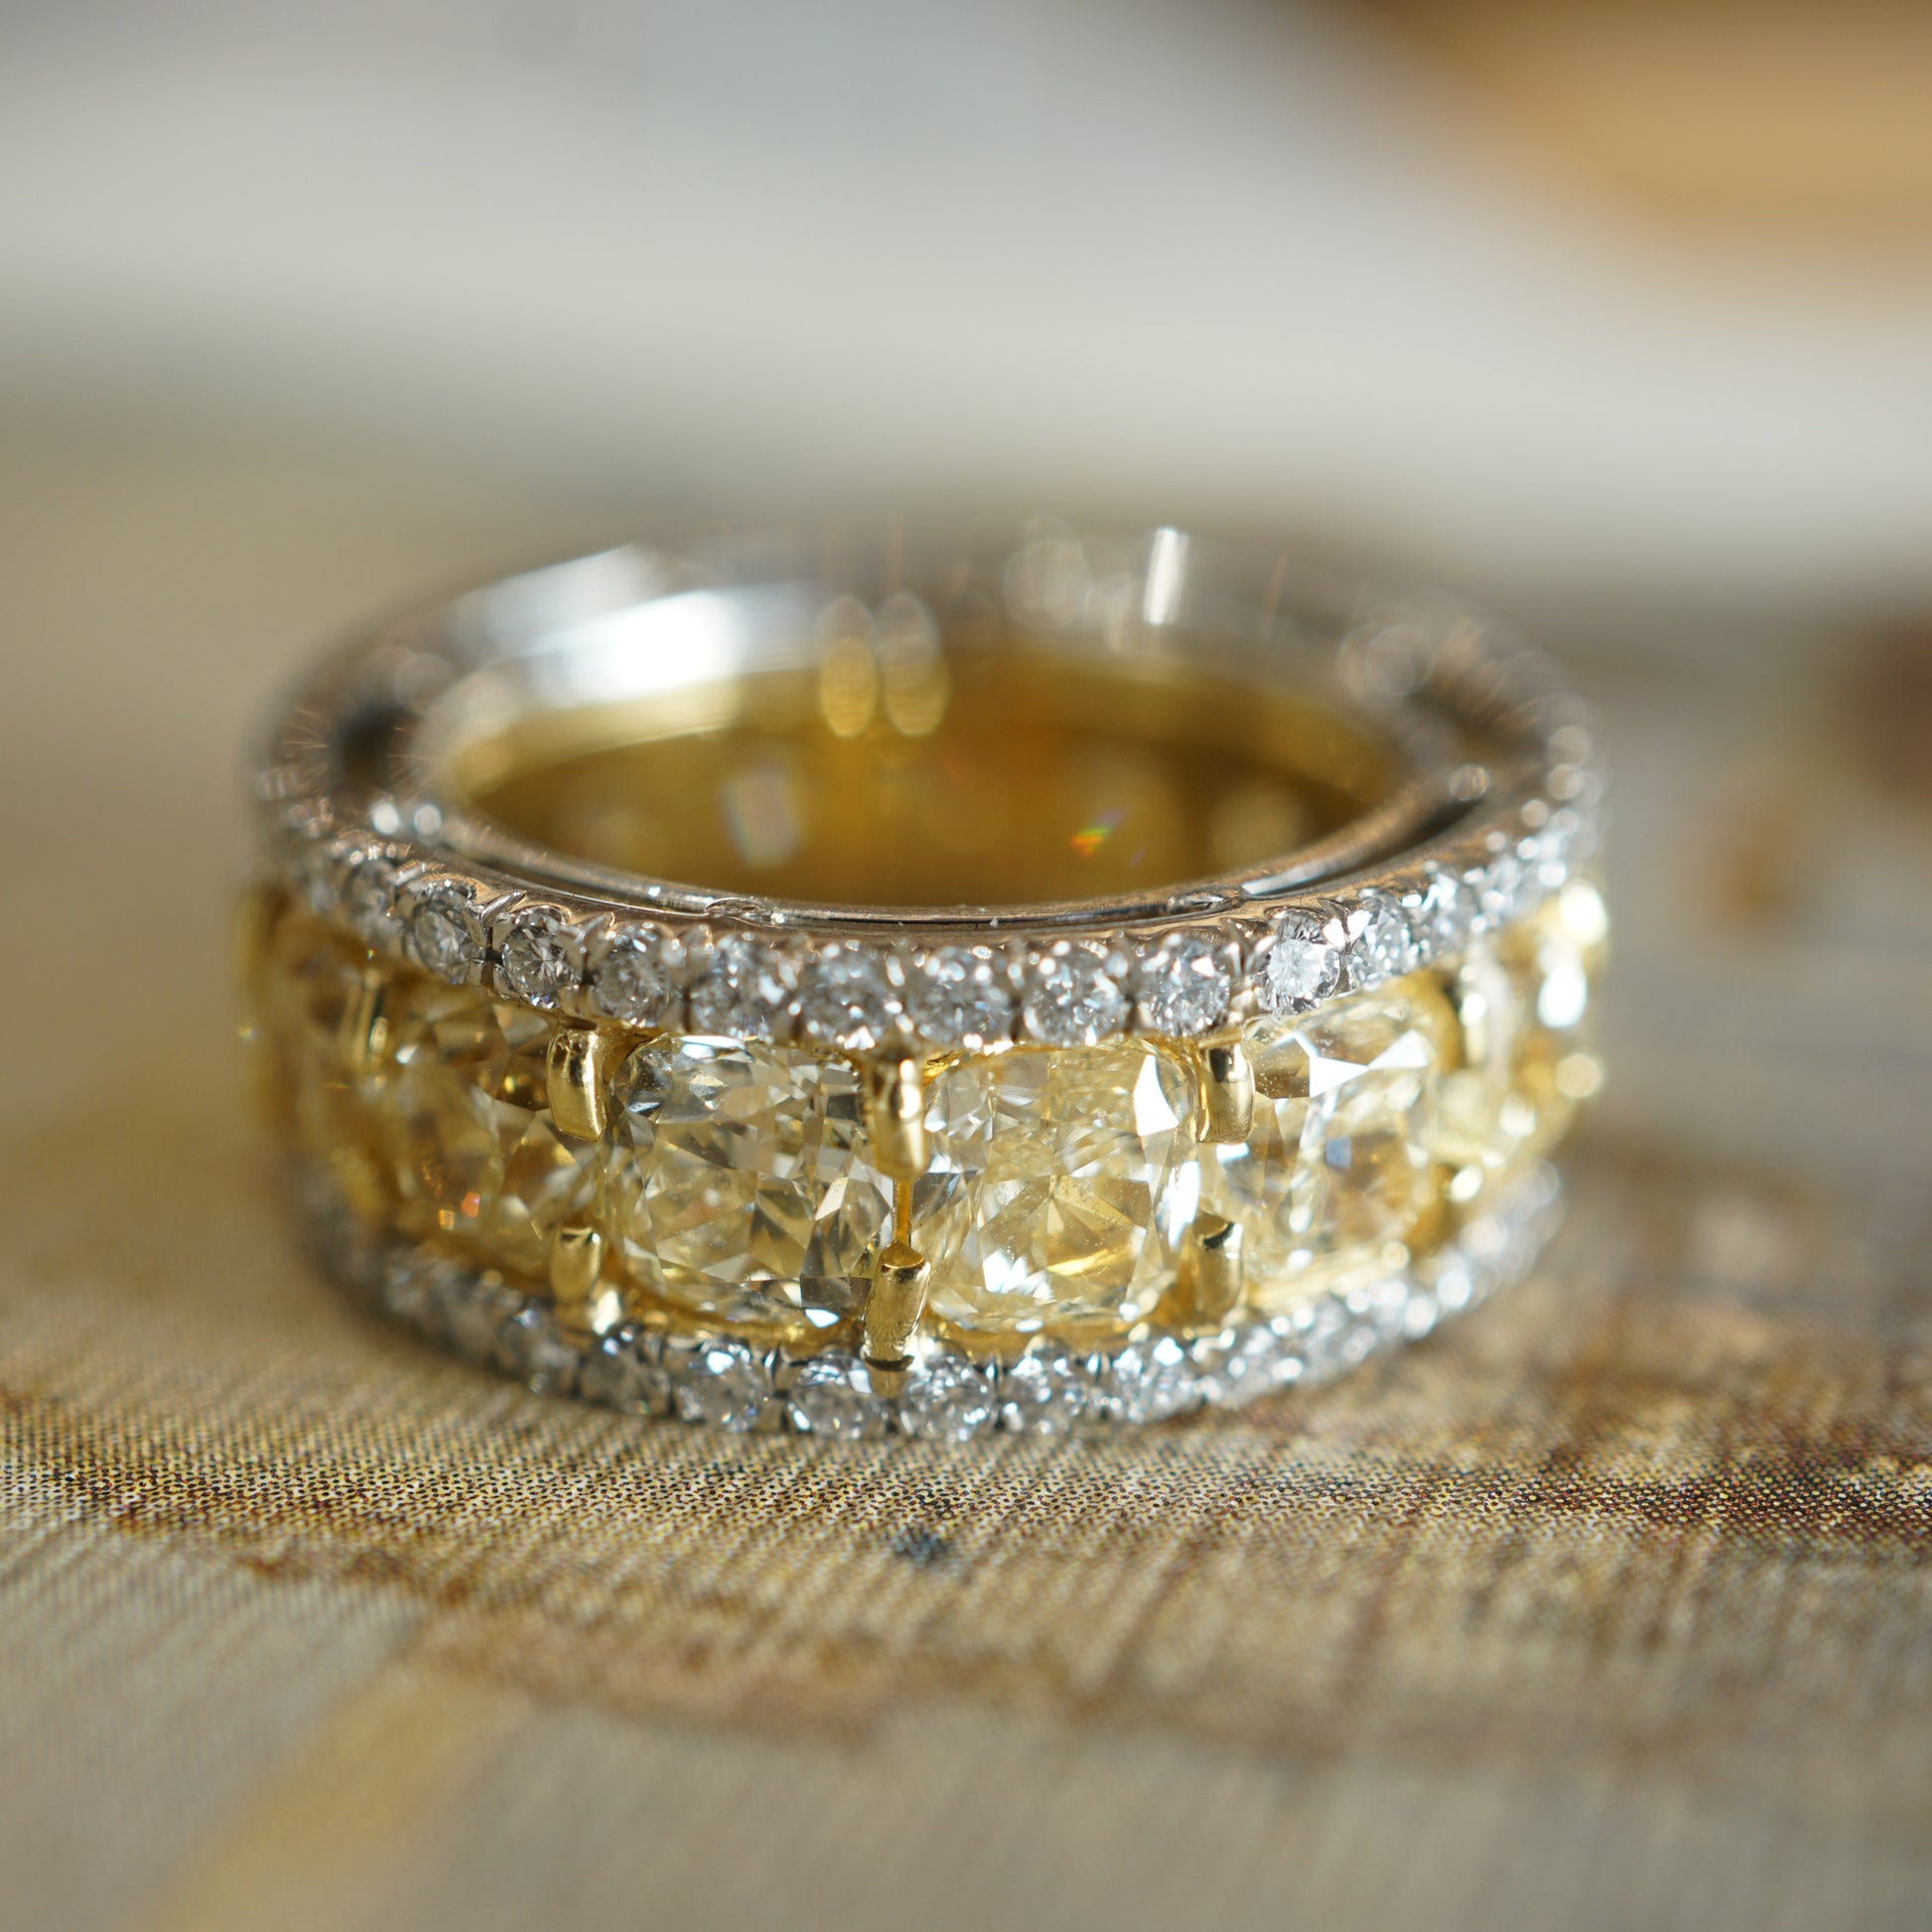 Fancy Yellow Diamond Cocktail Ring in Platinum & 18k Yellow GoldComposition: Platinum/18 Karat Yellow Gold Ring Size: 7 Total Diamond Weight: 12.38ct Total Gram Weight: 16.7 g Inscription: PT 900
      